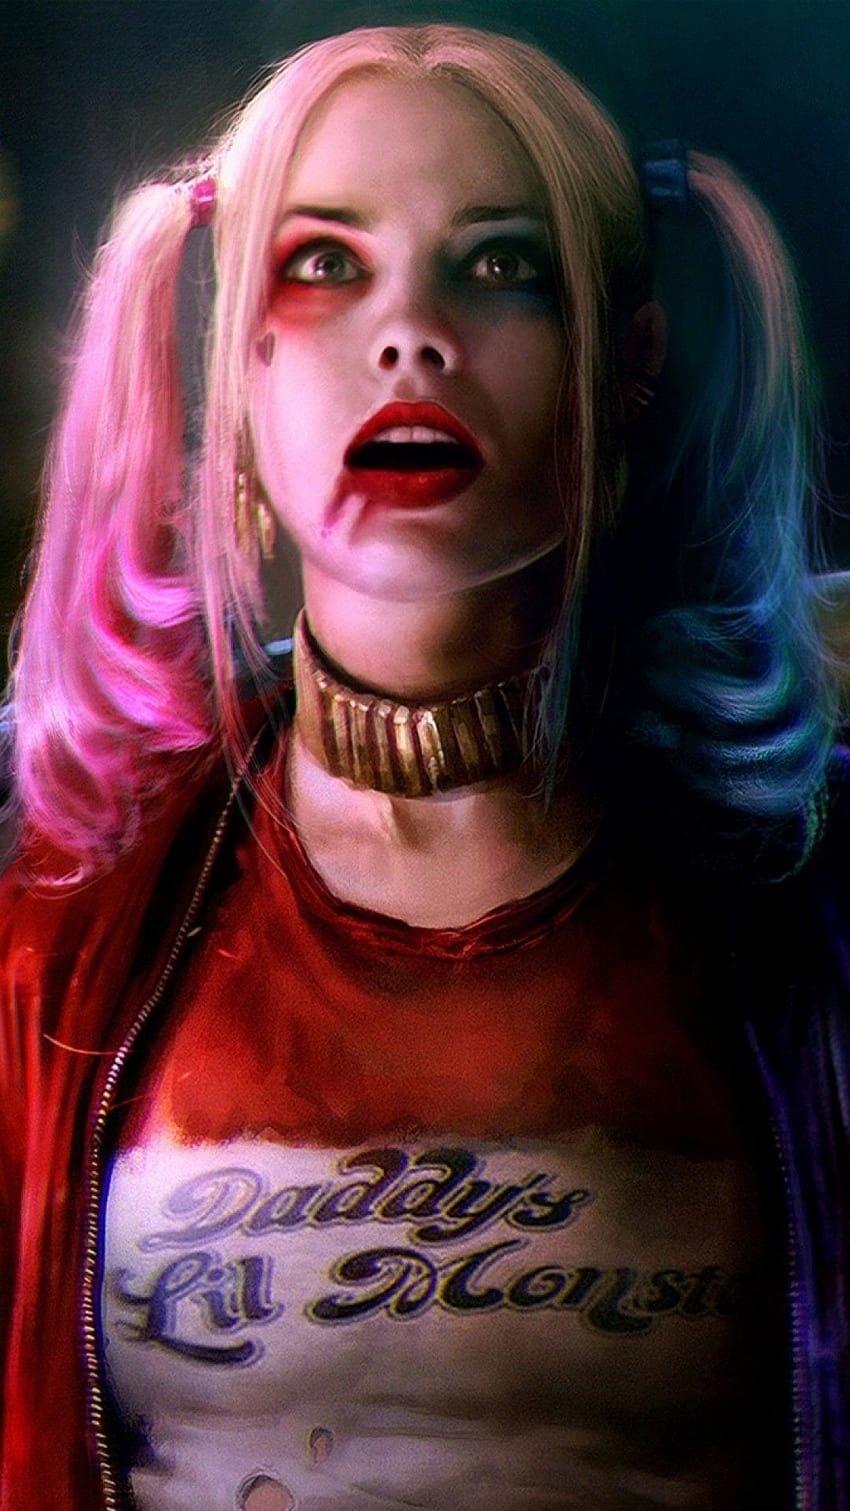 Harley Quinn, Suicide Squad, Margot Robbie for iPhone 8, iPhone 7 Plus, iPhone 6+, Sony Xperia Z, HTC One - Maiden, Margot Robbie 1080X1920 HD phone wallpaper